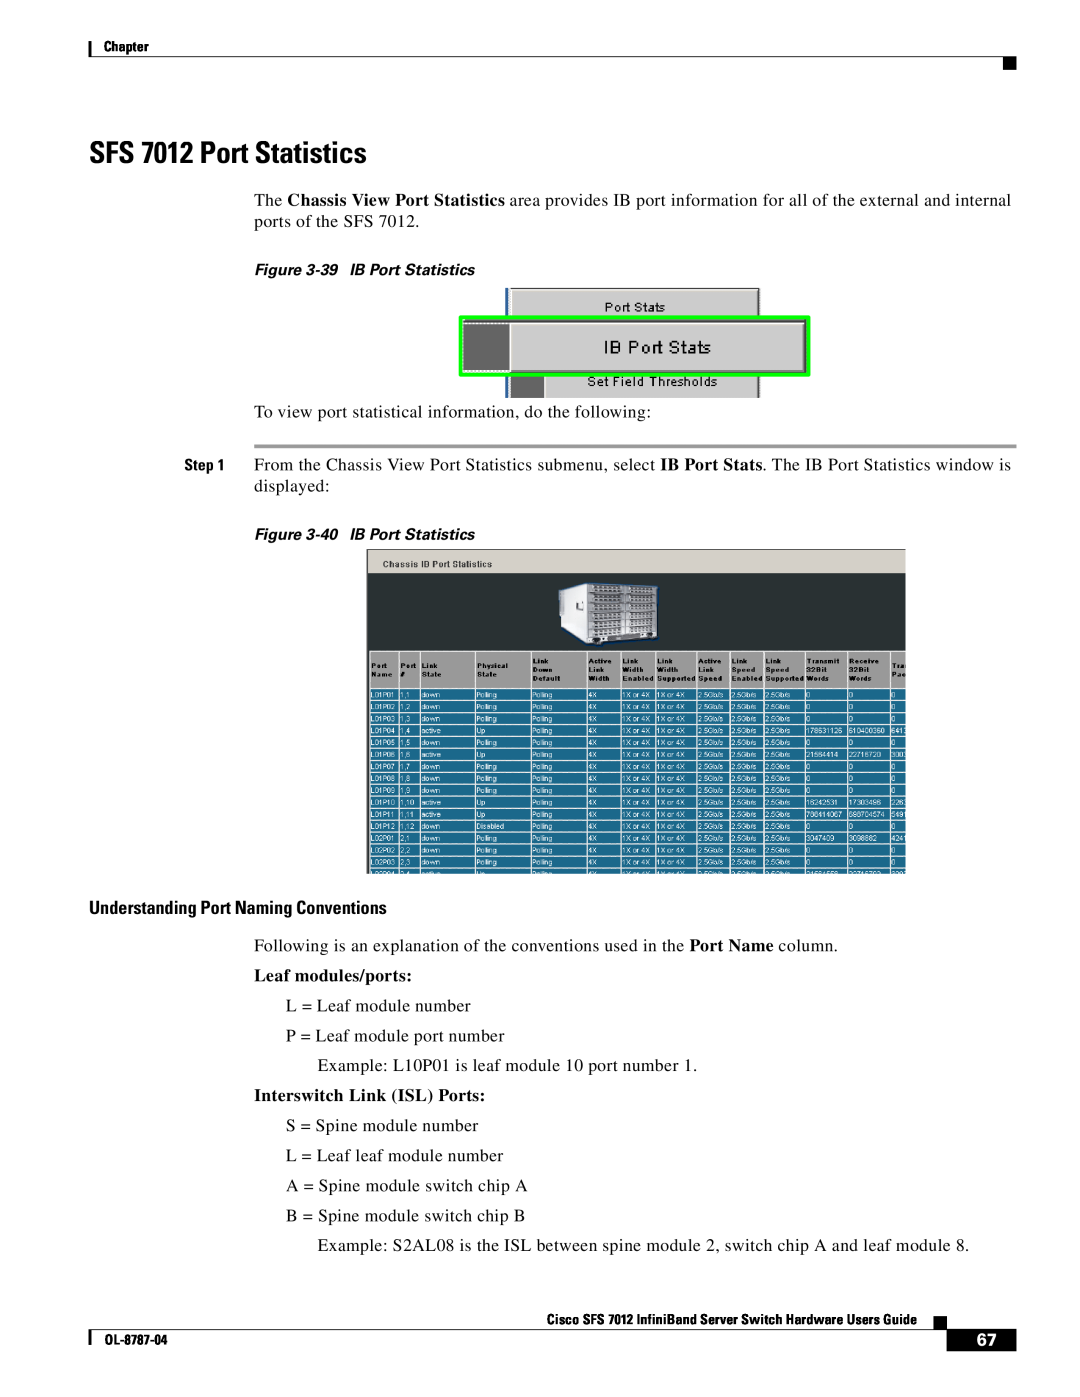 Cisco Systems manual SFS 7012 Port Statistics, Understanding Port Naming Conventions 